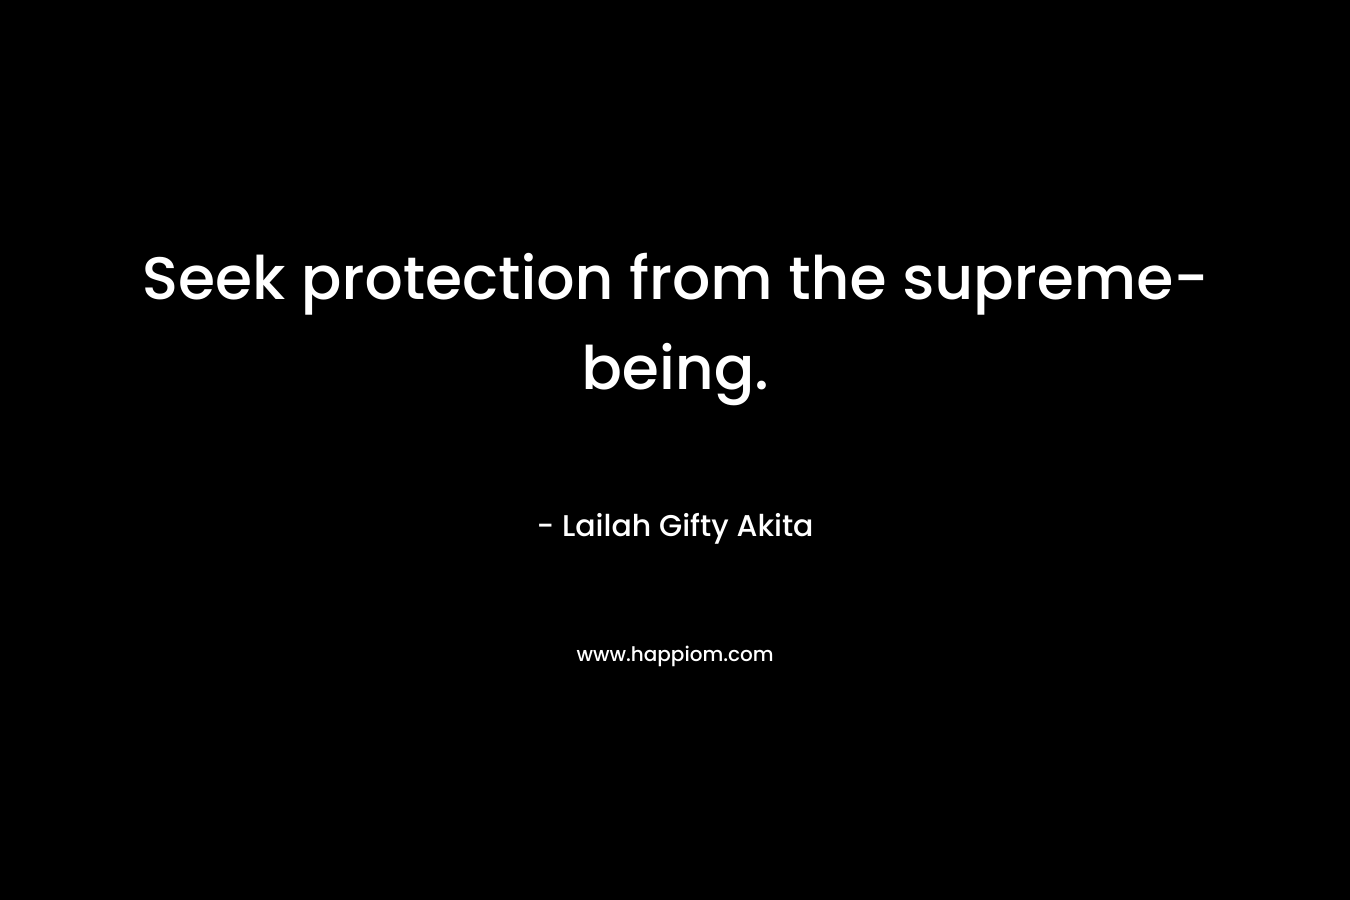 Seek protection from the supreme-being.